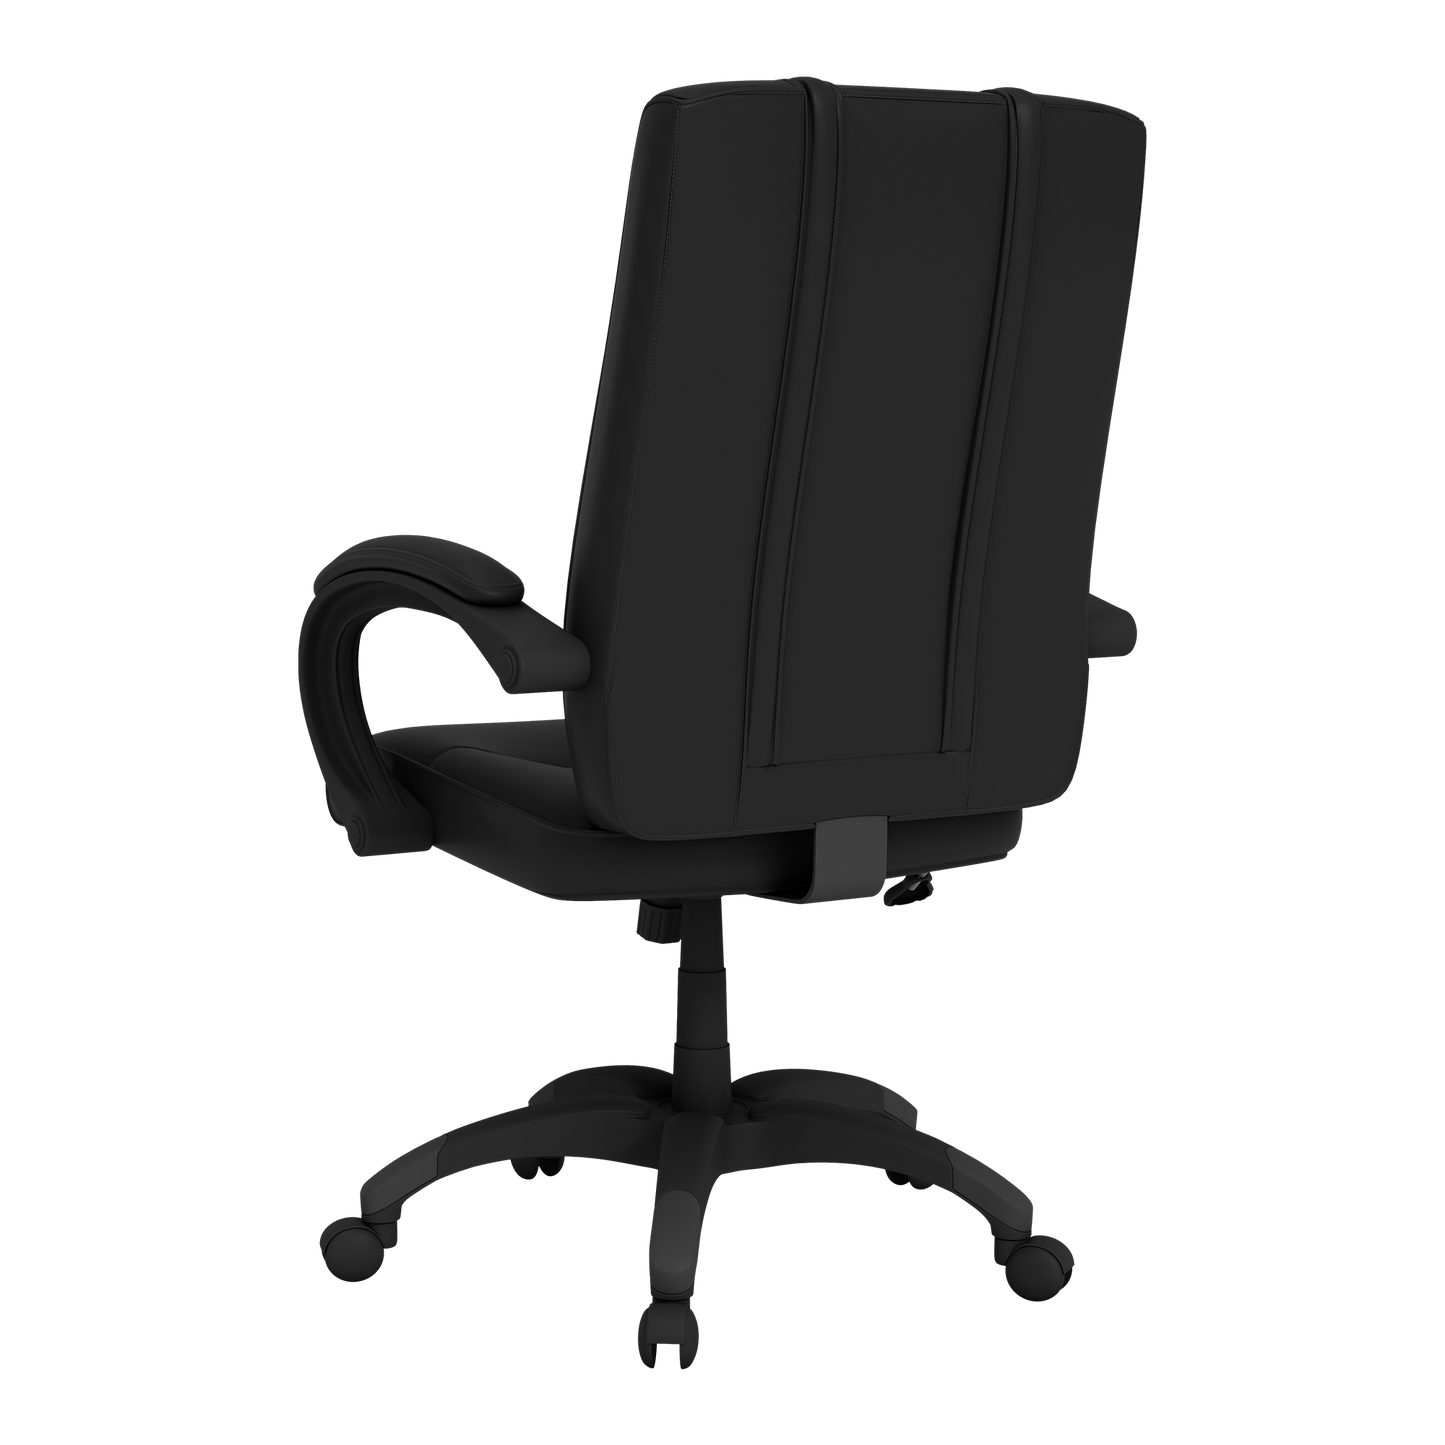 Office Chair 1000 with Los Angeles Angels Secondary